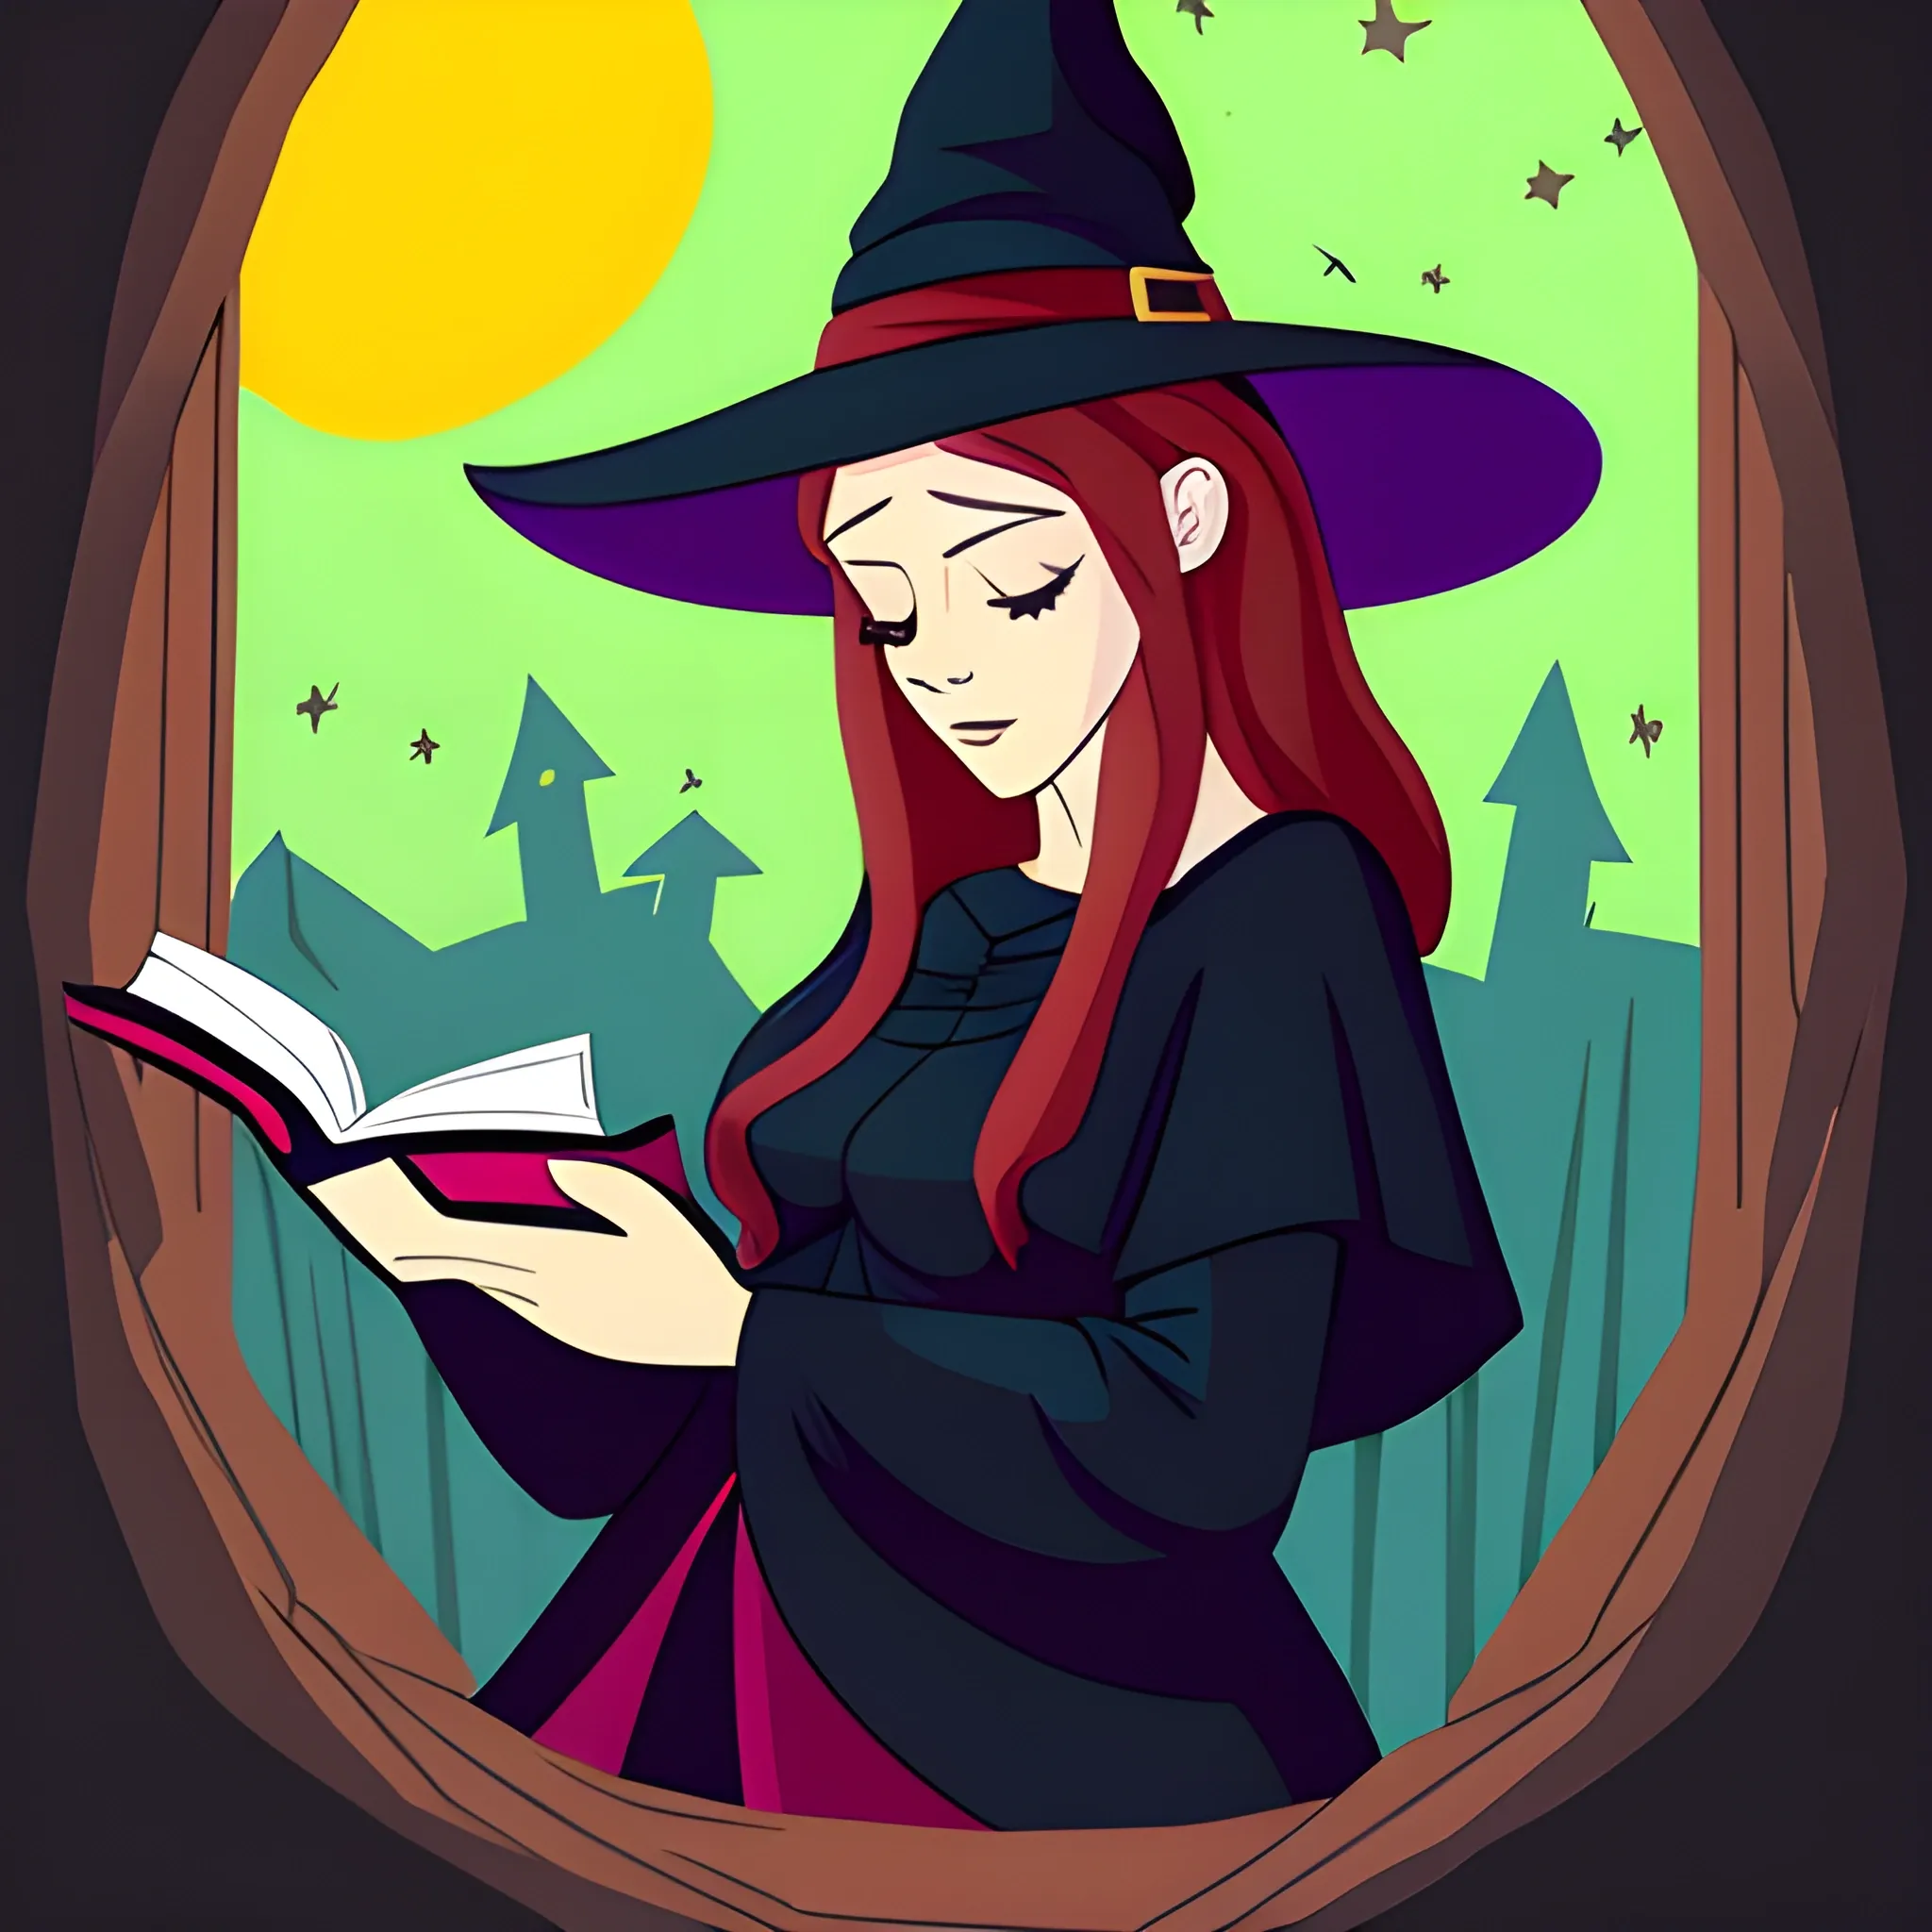 magna art style witchy woman reading a book